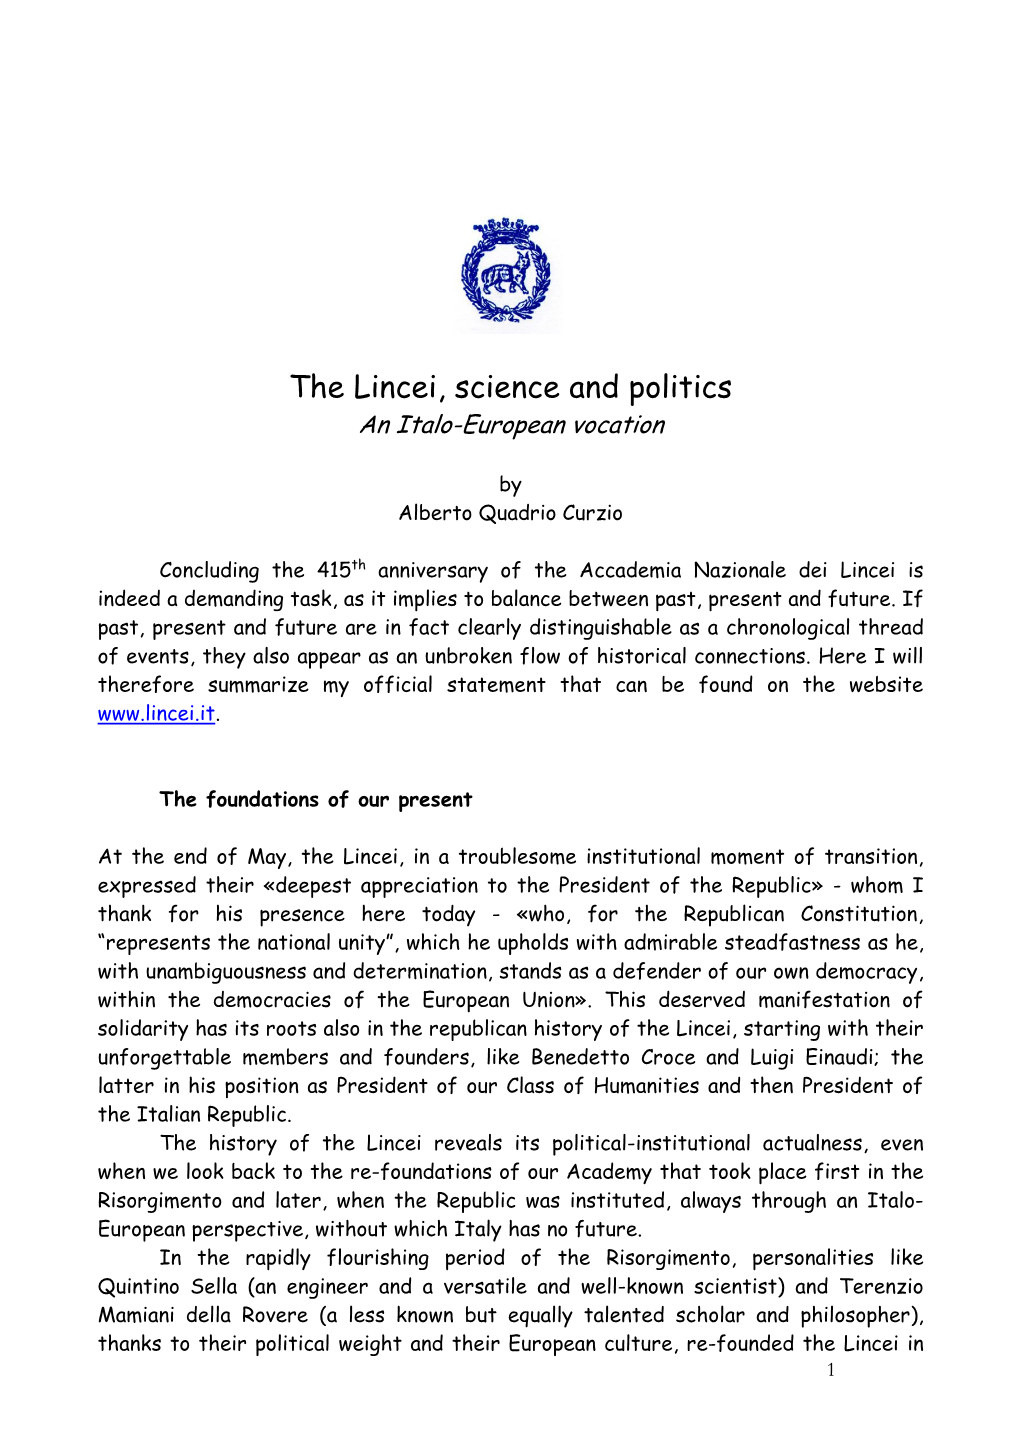 The Lincei, Science and Politics an Italo-European Vocation